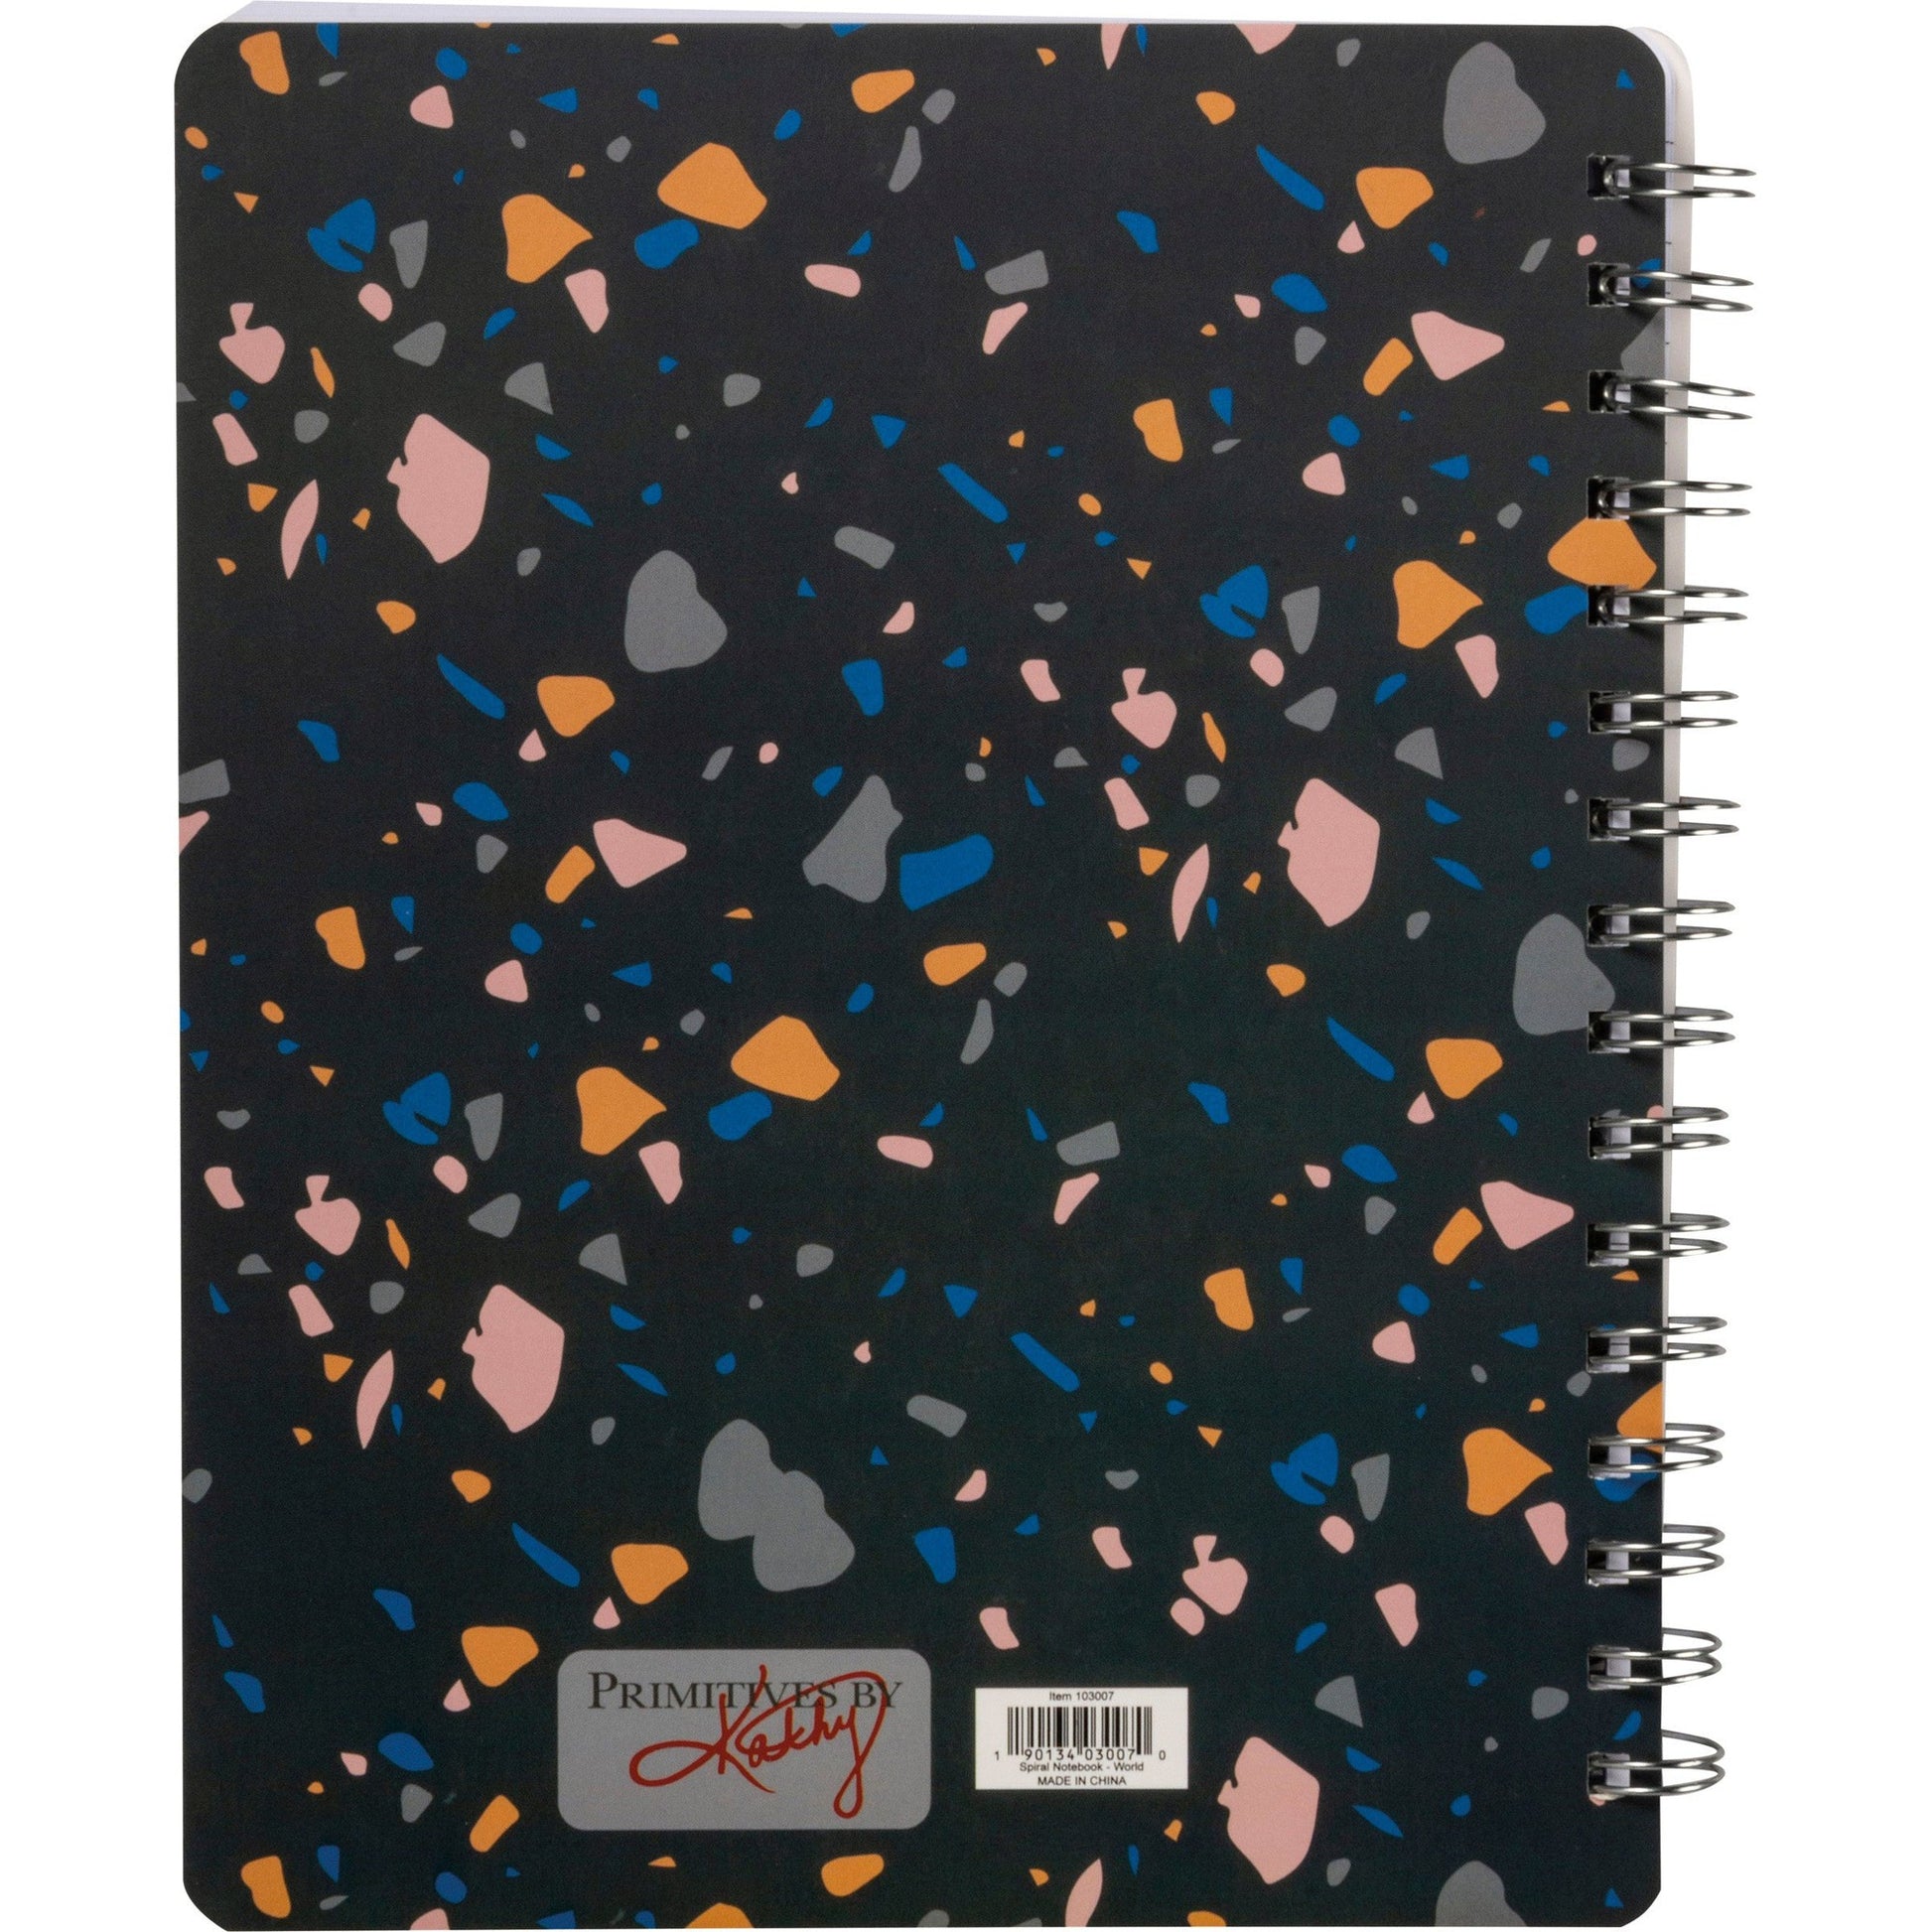 The World Is Yours Spiral Notebook in Colorful Terrazzo Design | Art on Both Sides | 9" x 7" | 120 Lined Pages | 1980s Memphis-Inspired Design